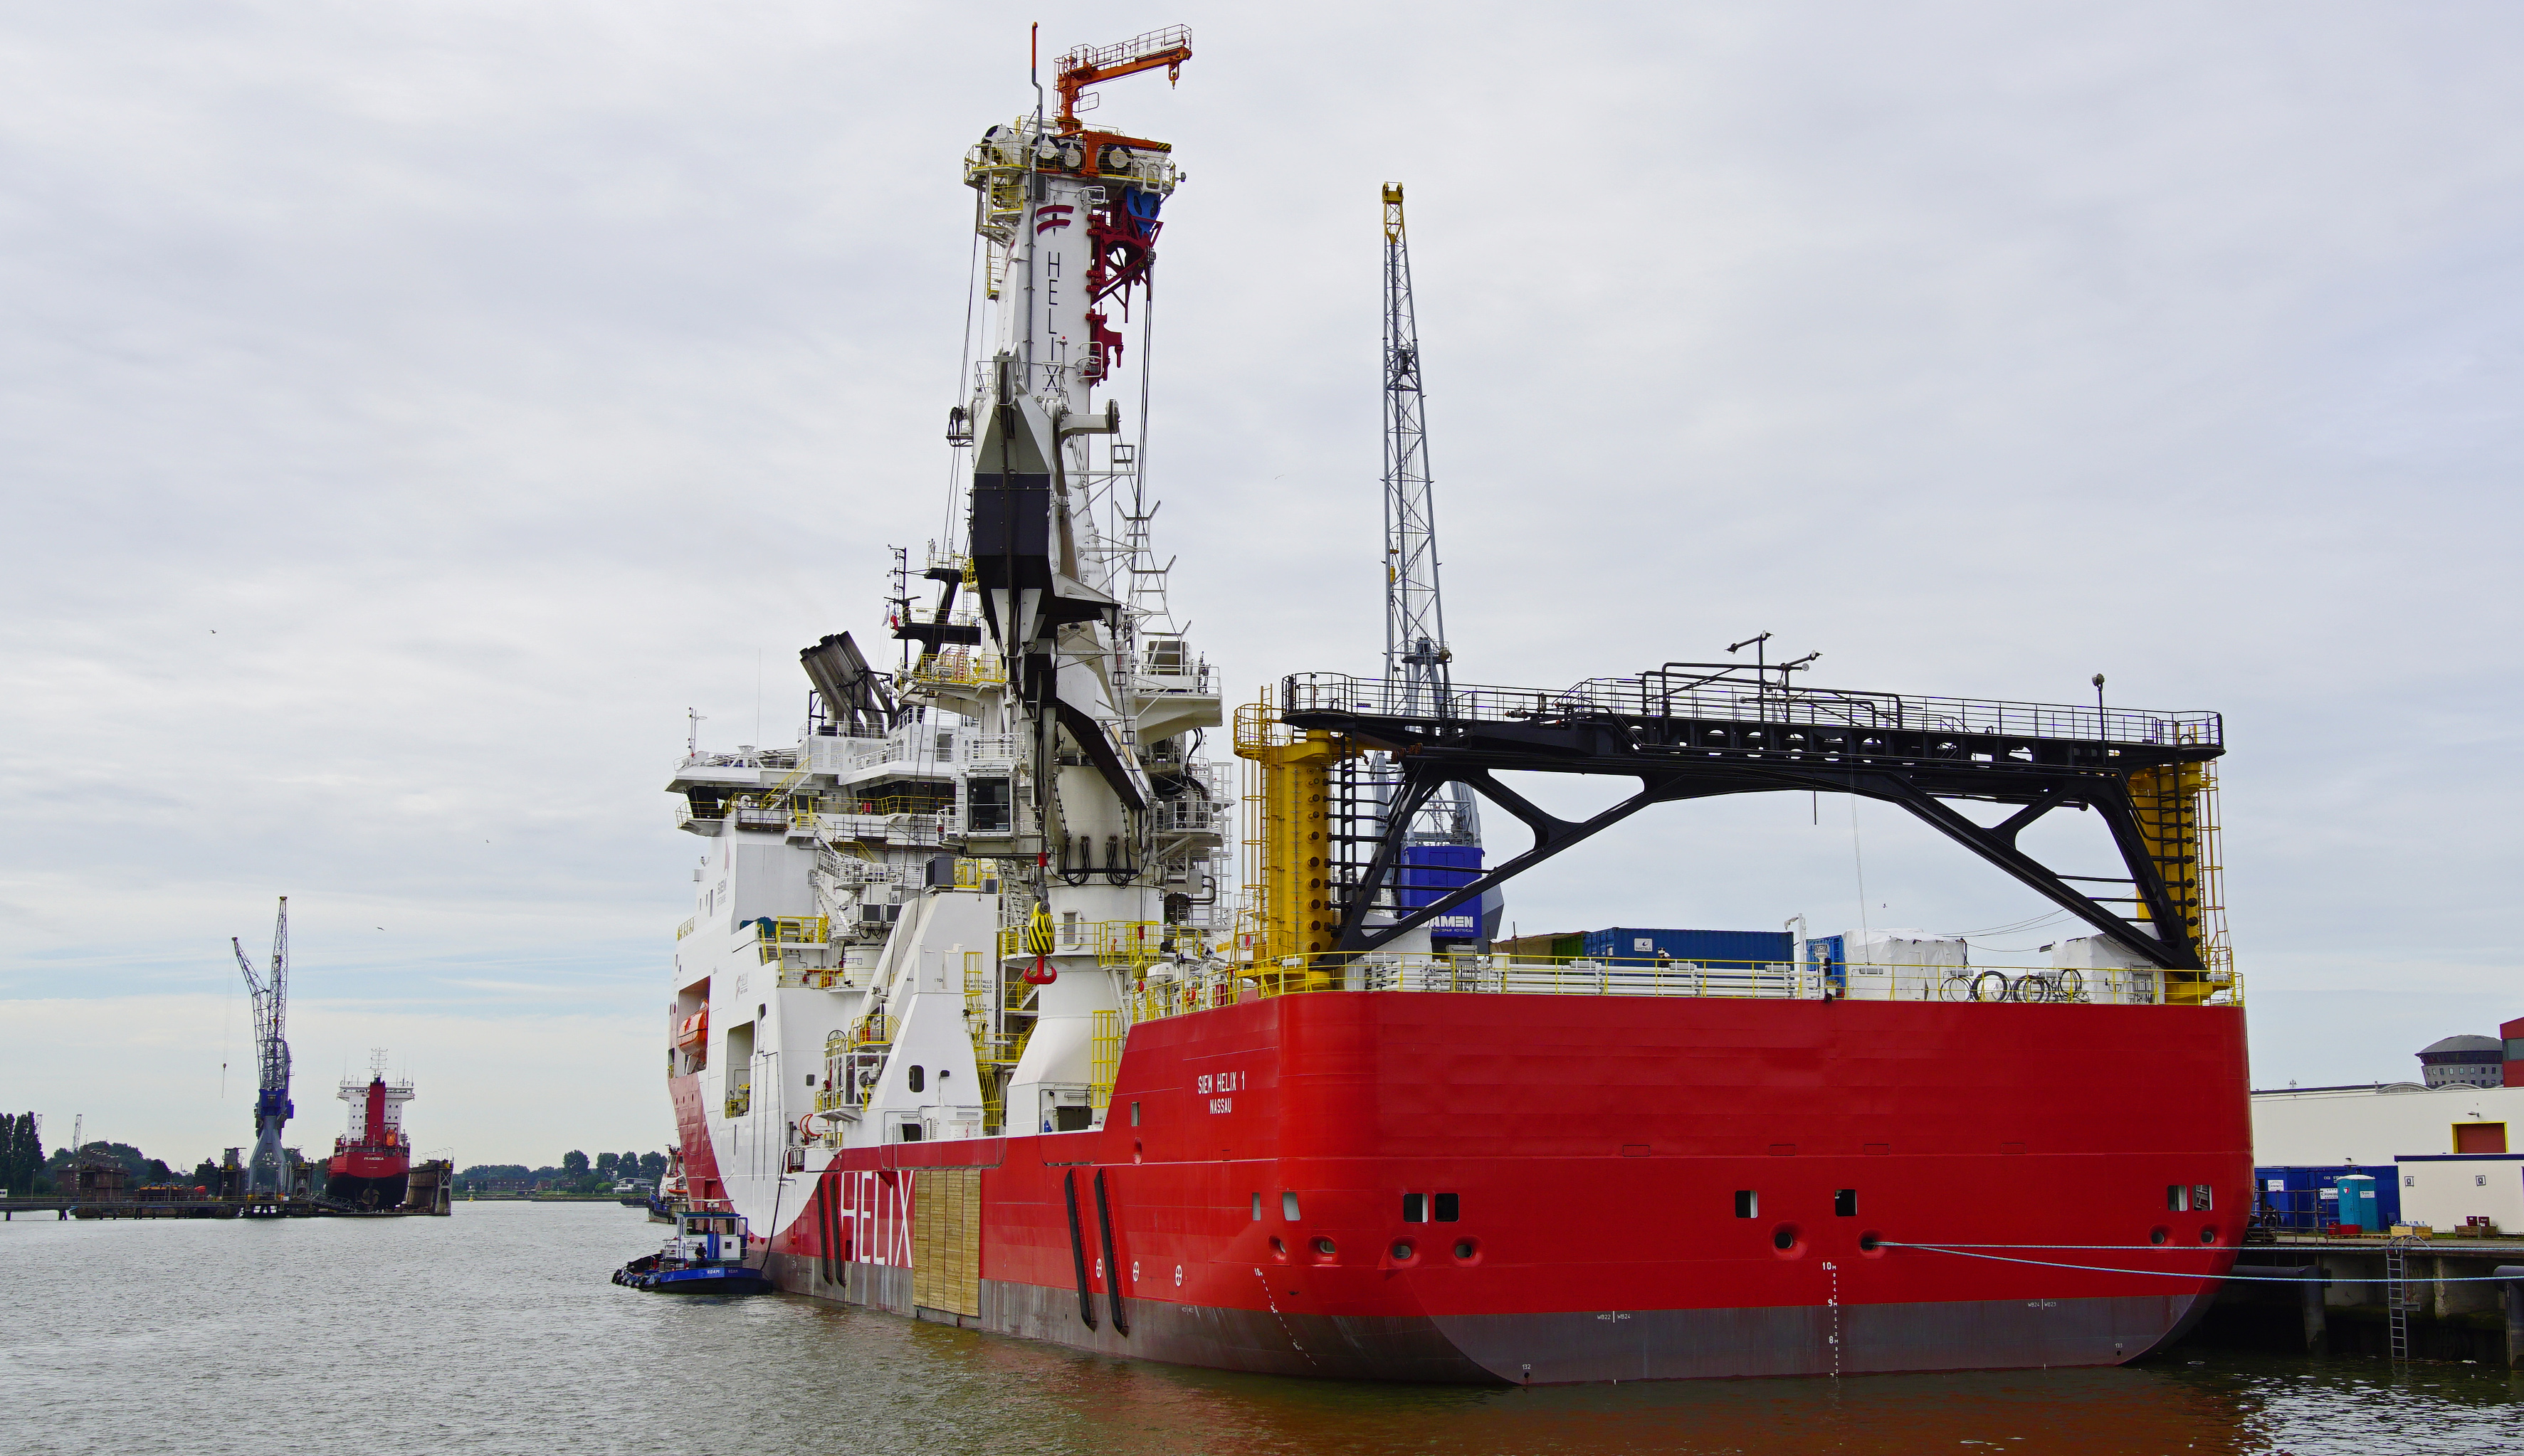 Free download wallpaper Ship, Vehicles, Offshore Support Vessel, Siem Helix 1 on your PC desktop